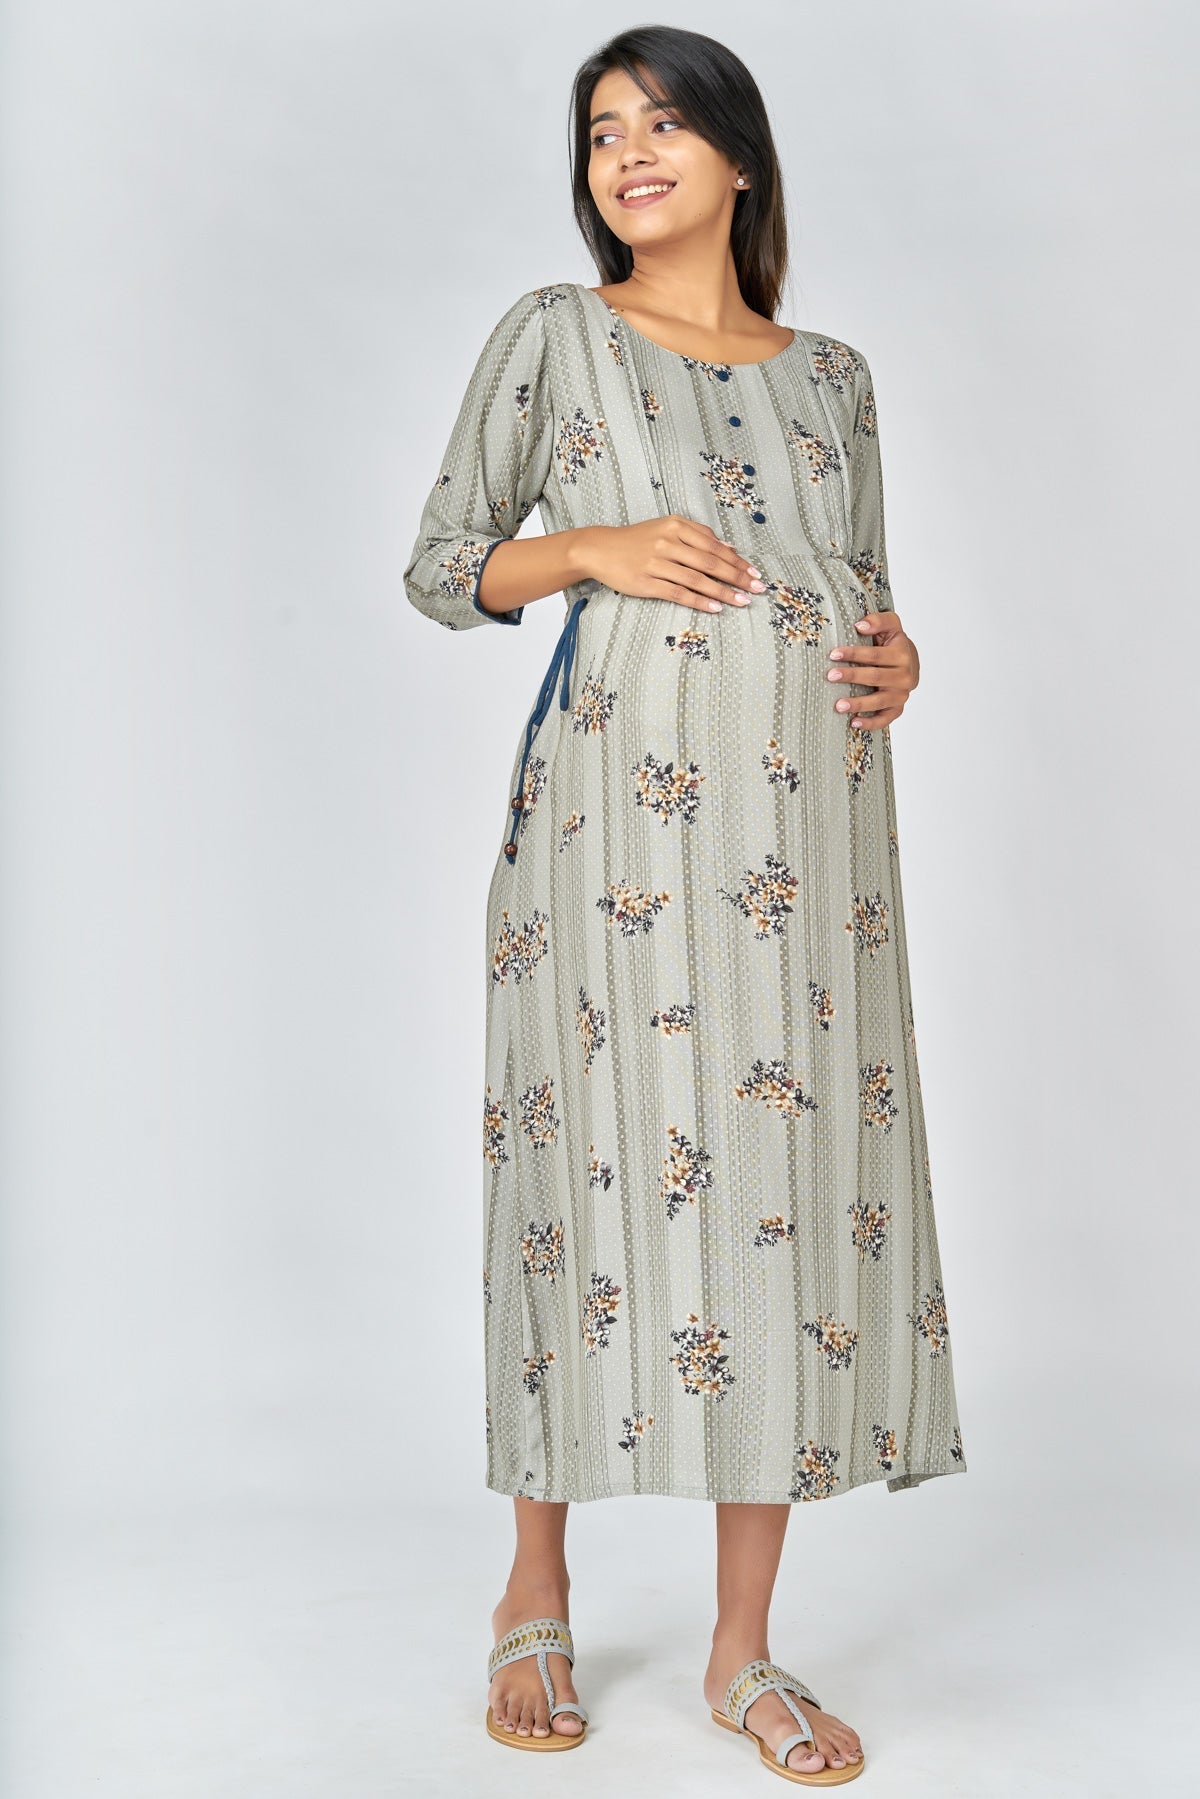 Floral & Dotted Print Maternity Long Dress- Grey